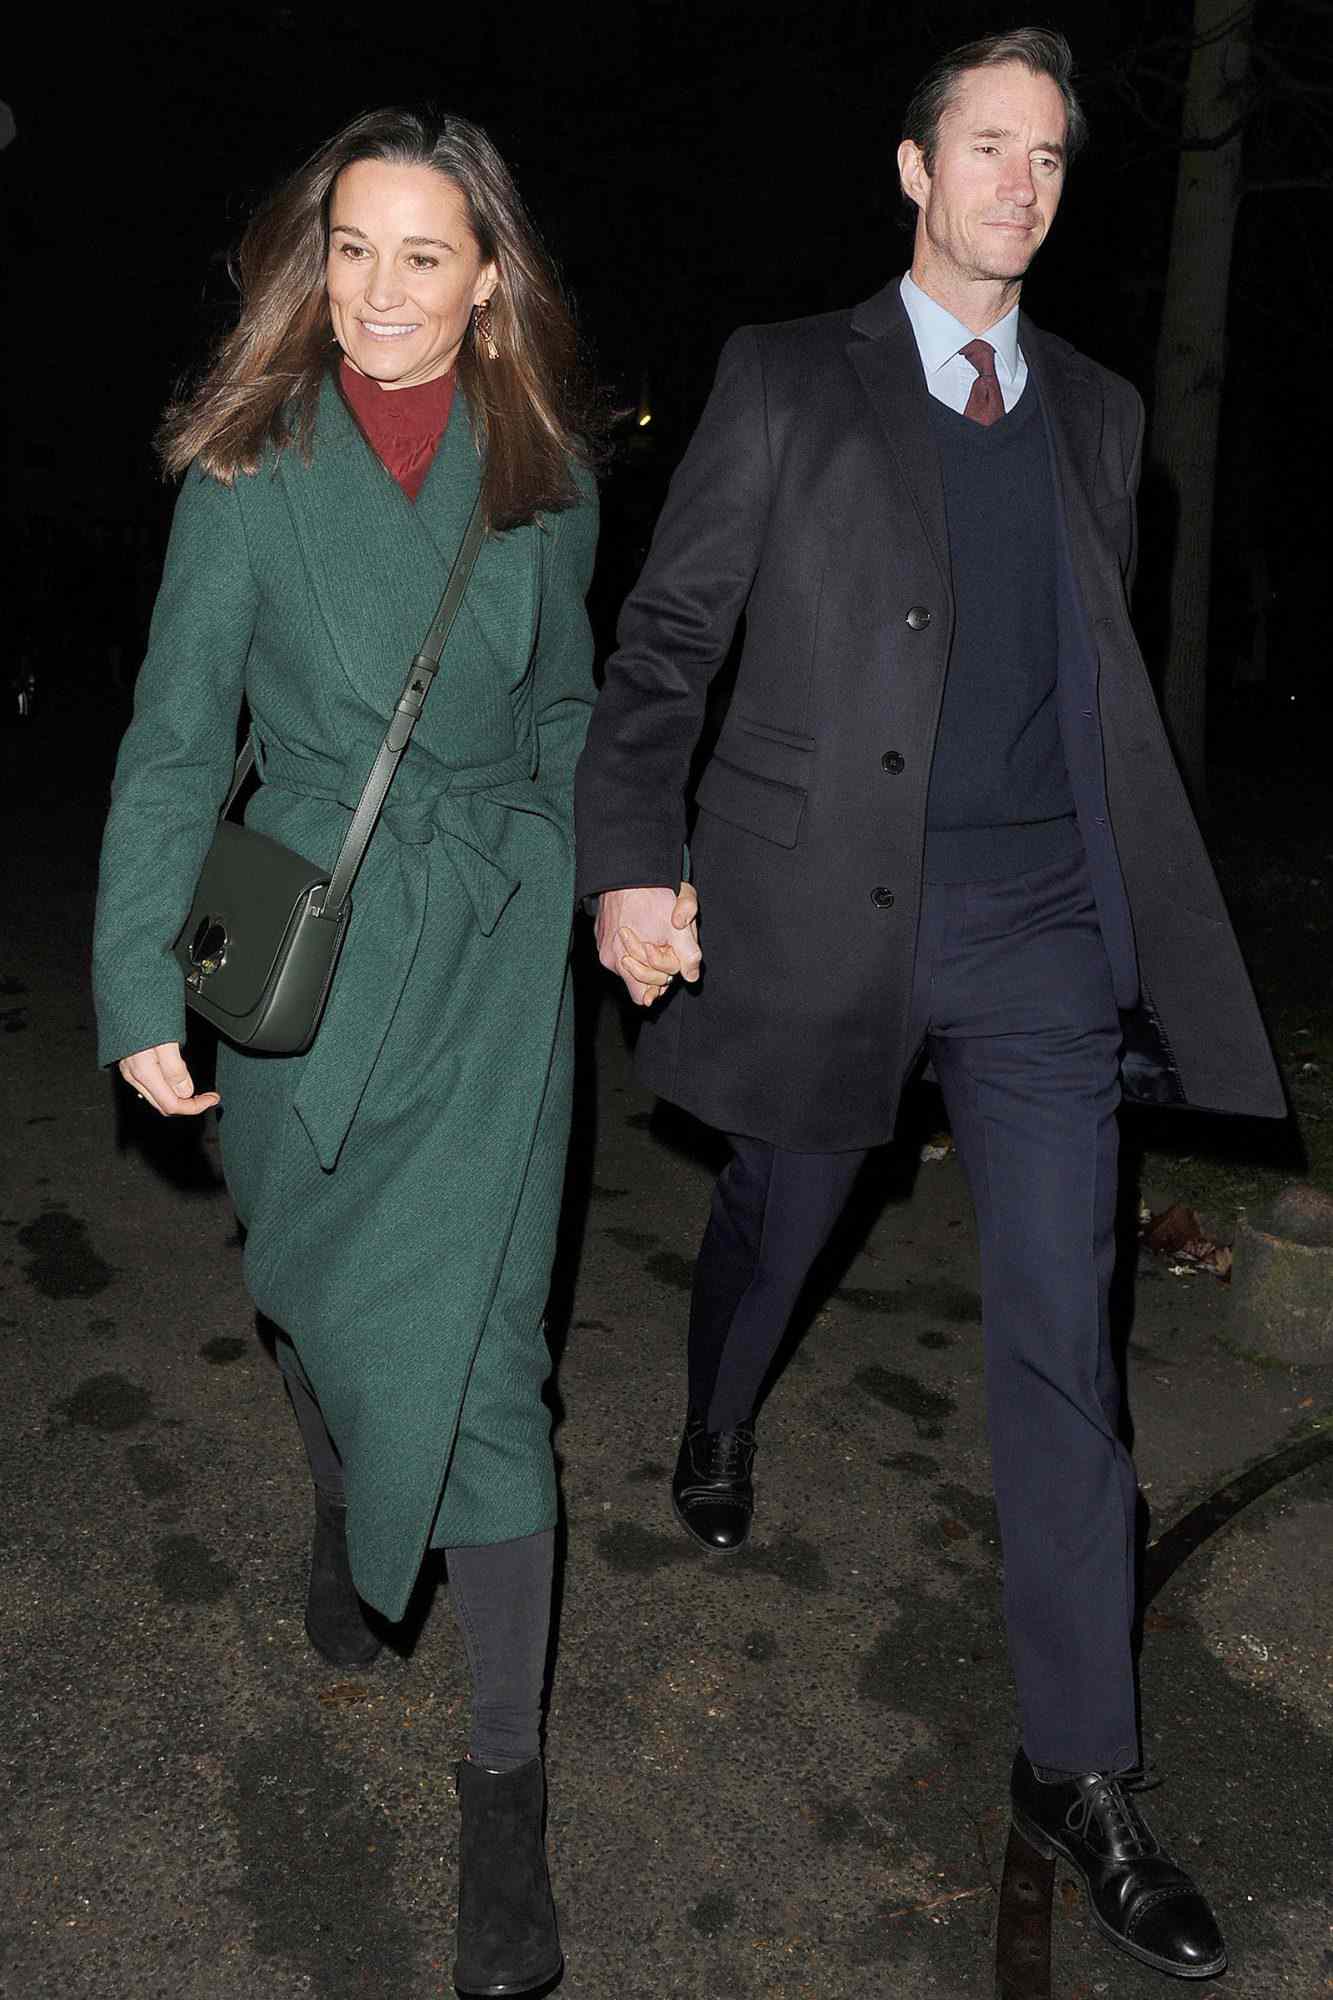 Pippa Middleton and her husband James Matthews leaving St Luke's church in Chelsea, hand in hand, having attended The Henry Van Straubenzee Memorial Fund's Christmas Carol Service